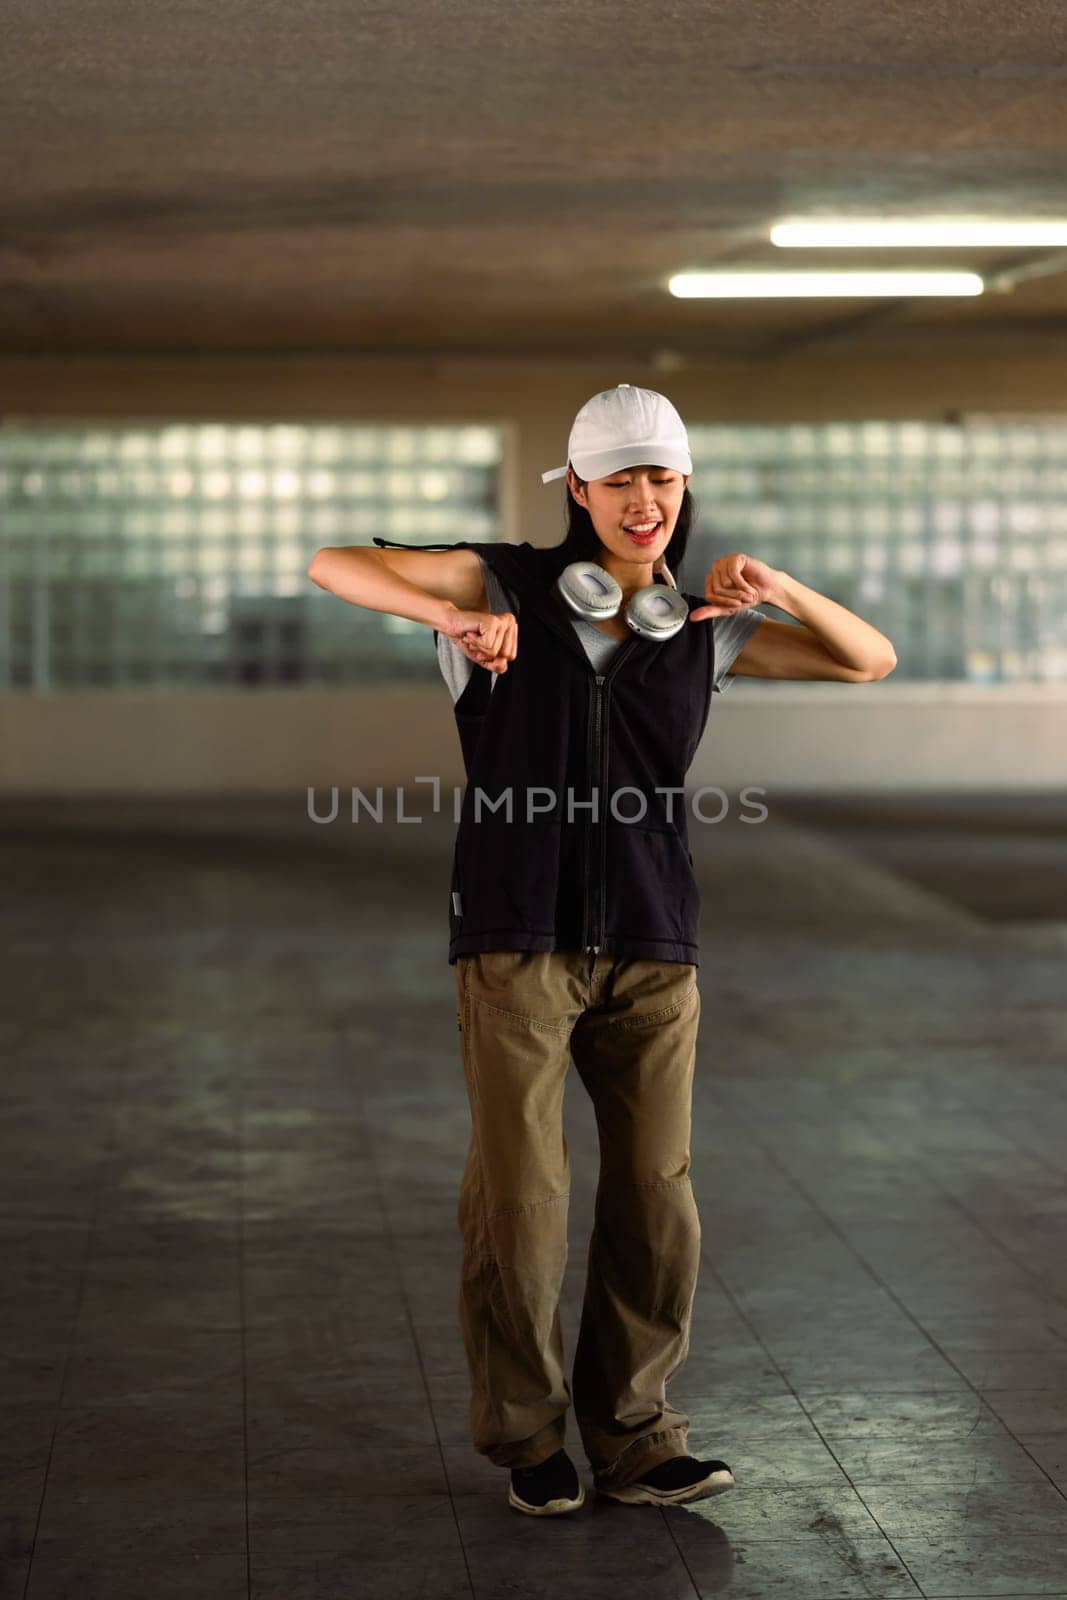 Smiling young female dancing in parking garage. Hobby and active lifestyle concept by prathanchorruangsak